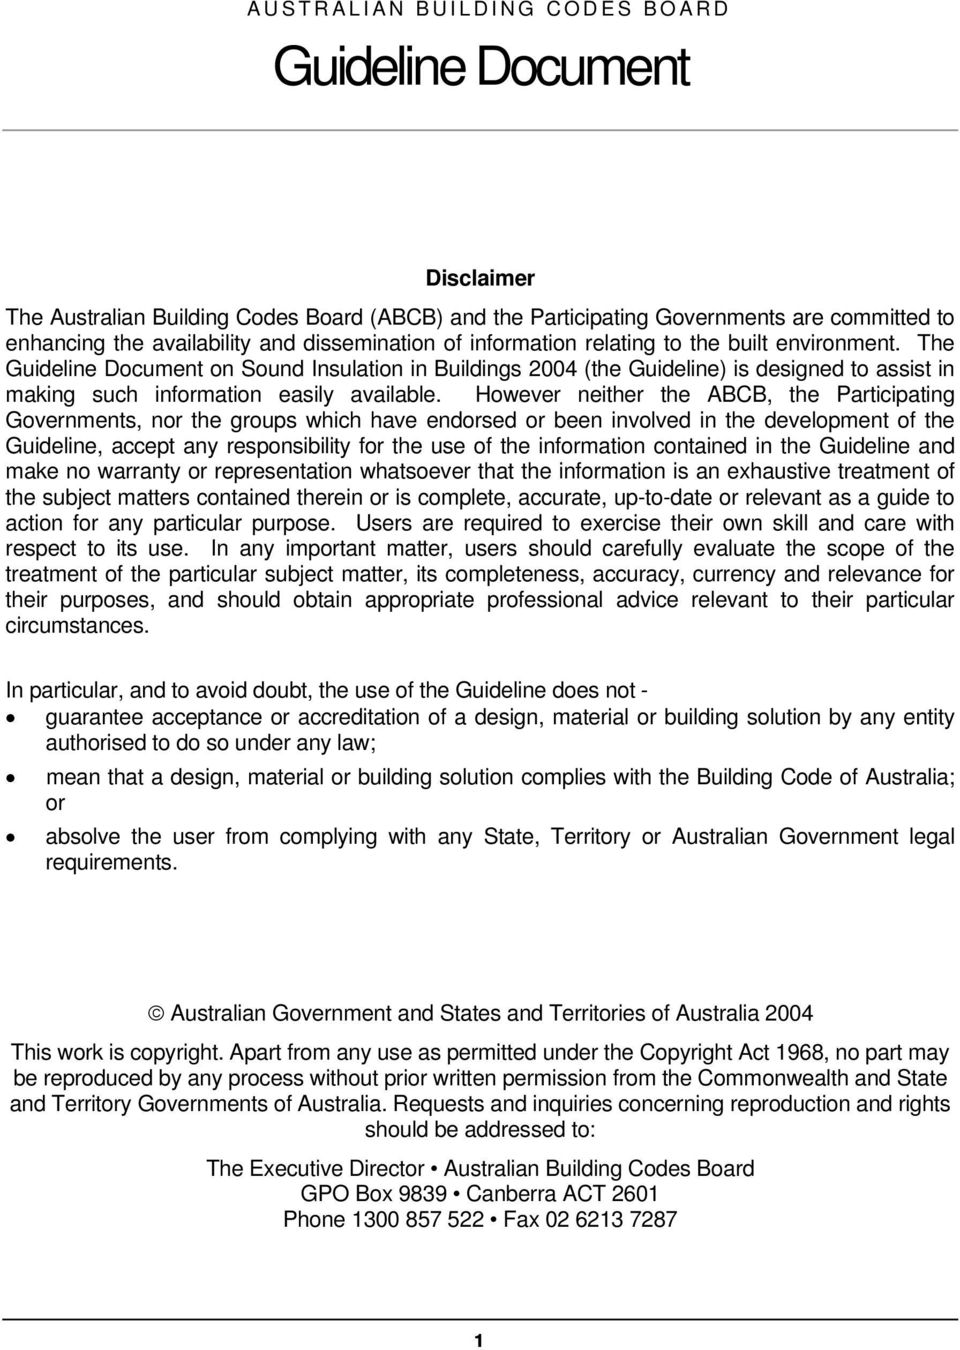 The Guideline Document on Sound Insulation in Buildings 2004 (the Guideline) is designed to assist in making such information easily available.